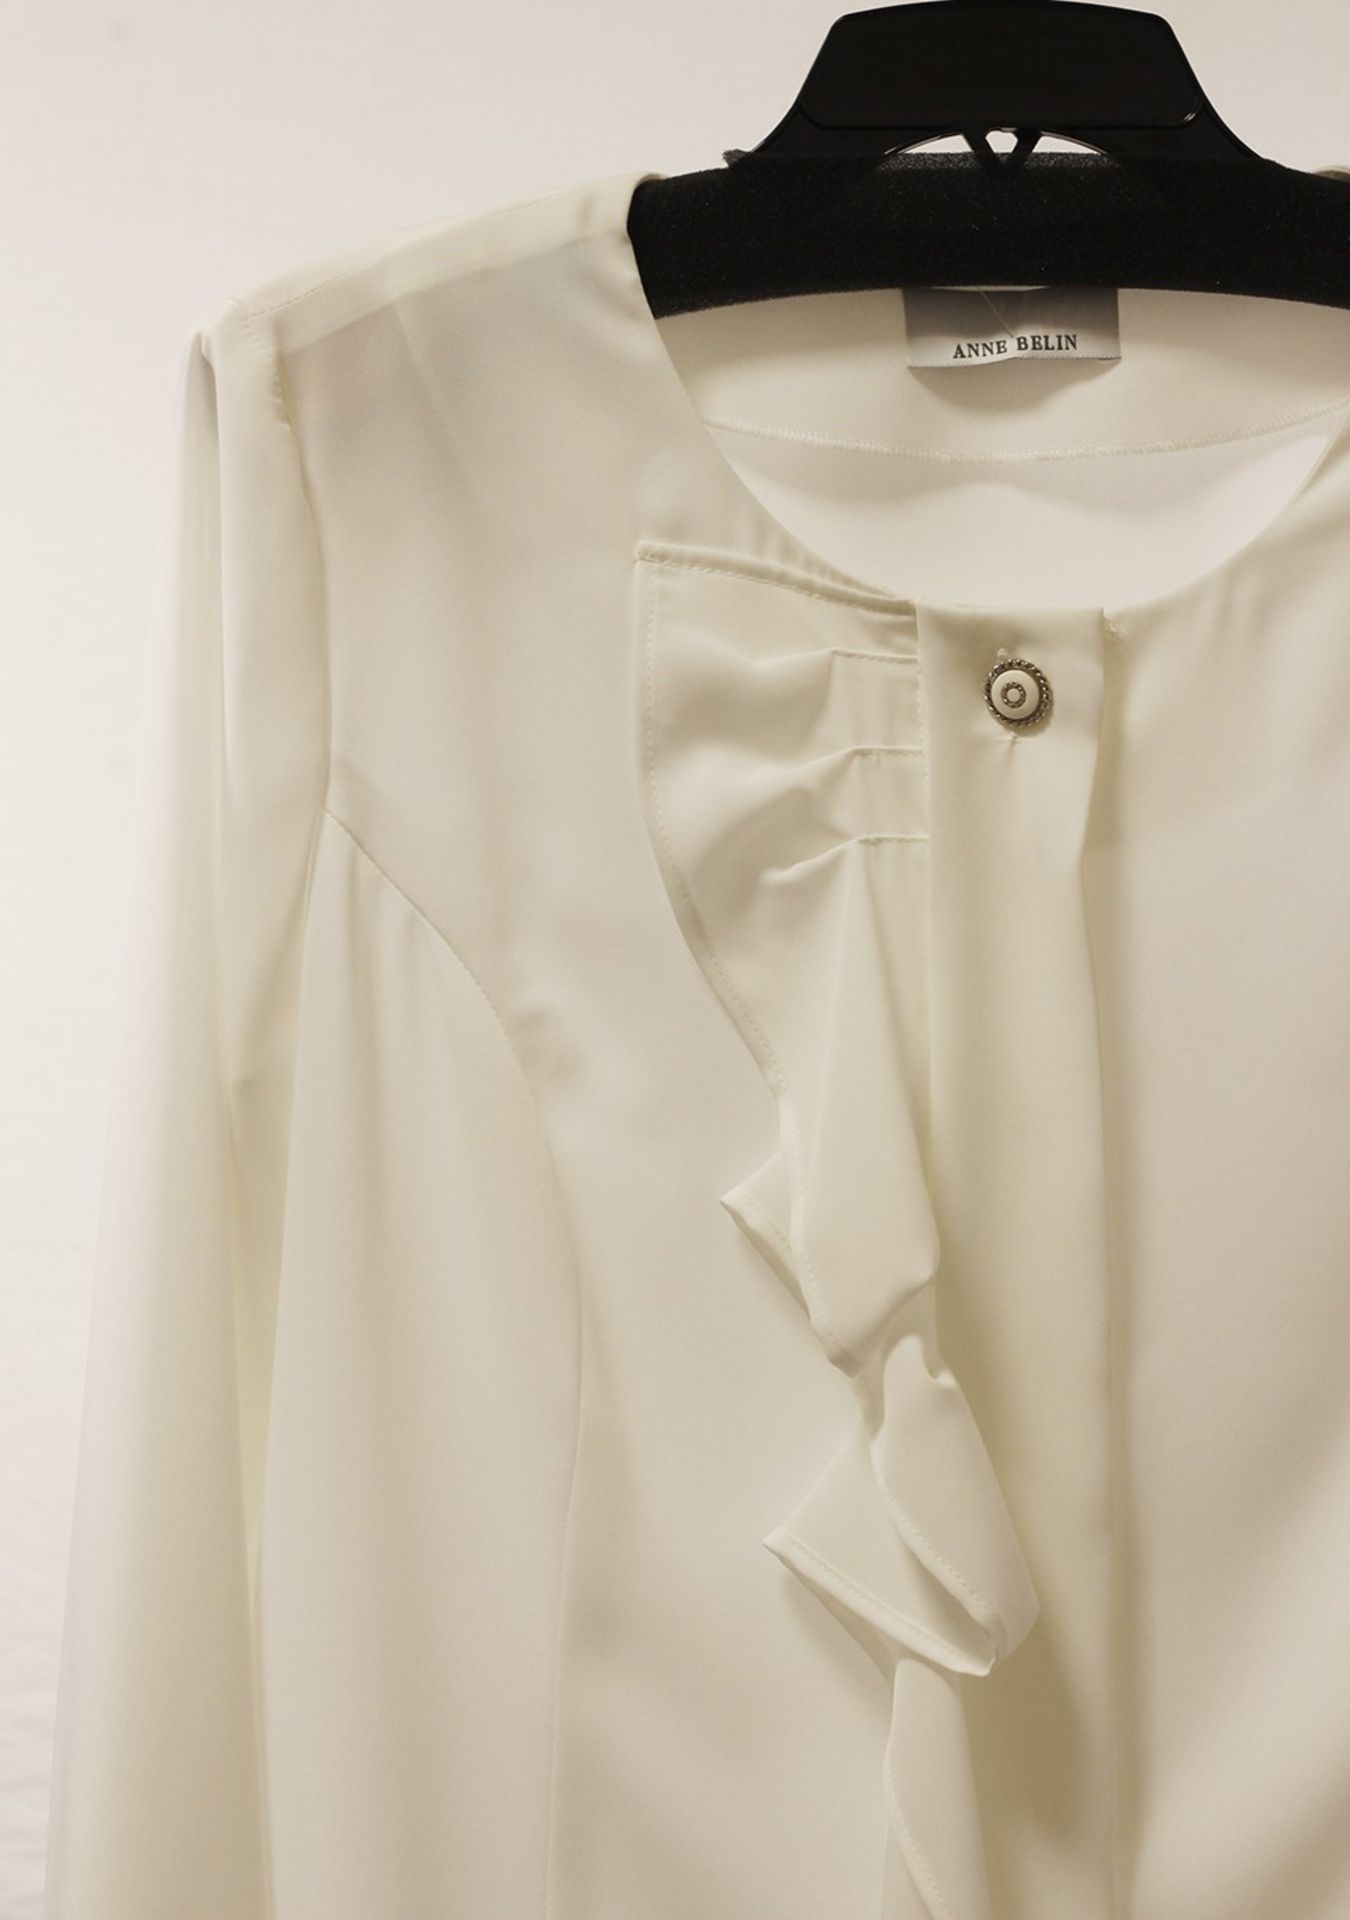 1 x Anne Belin White Shirt - Size: 18 - Material: 100% Polyester - From a High End Clothing Boutique - Image 2 of 9